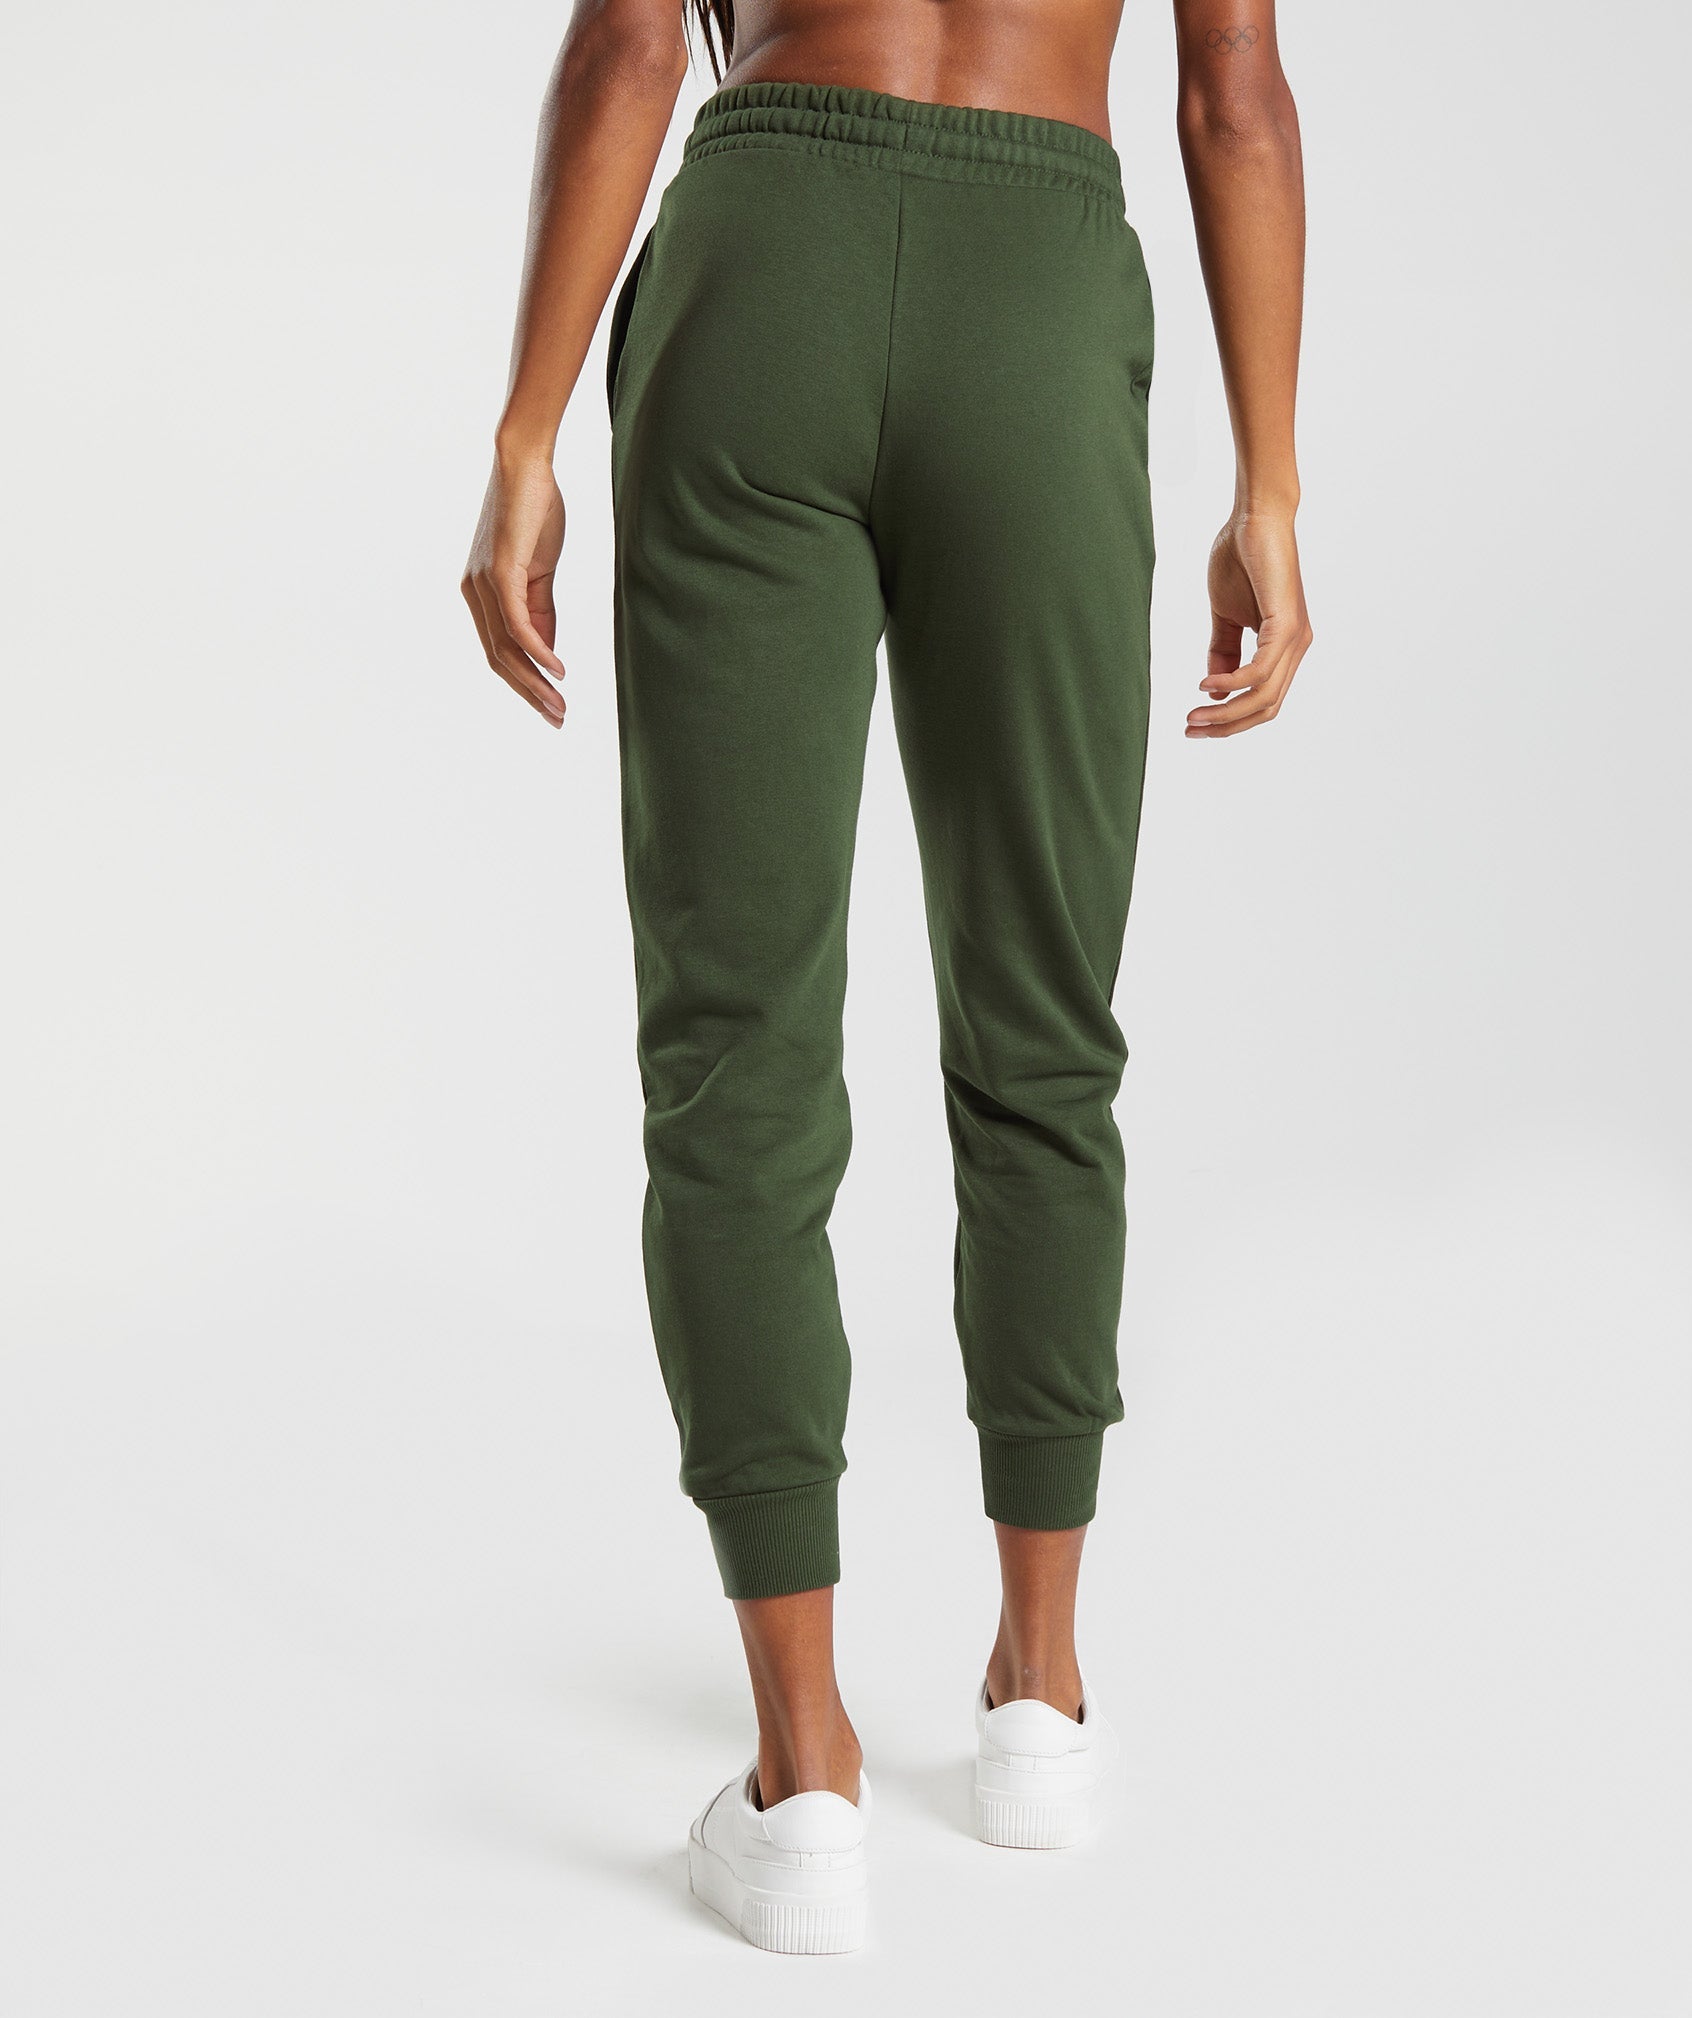 Social Club Joggers in Moss Olive - view 2